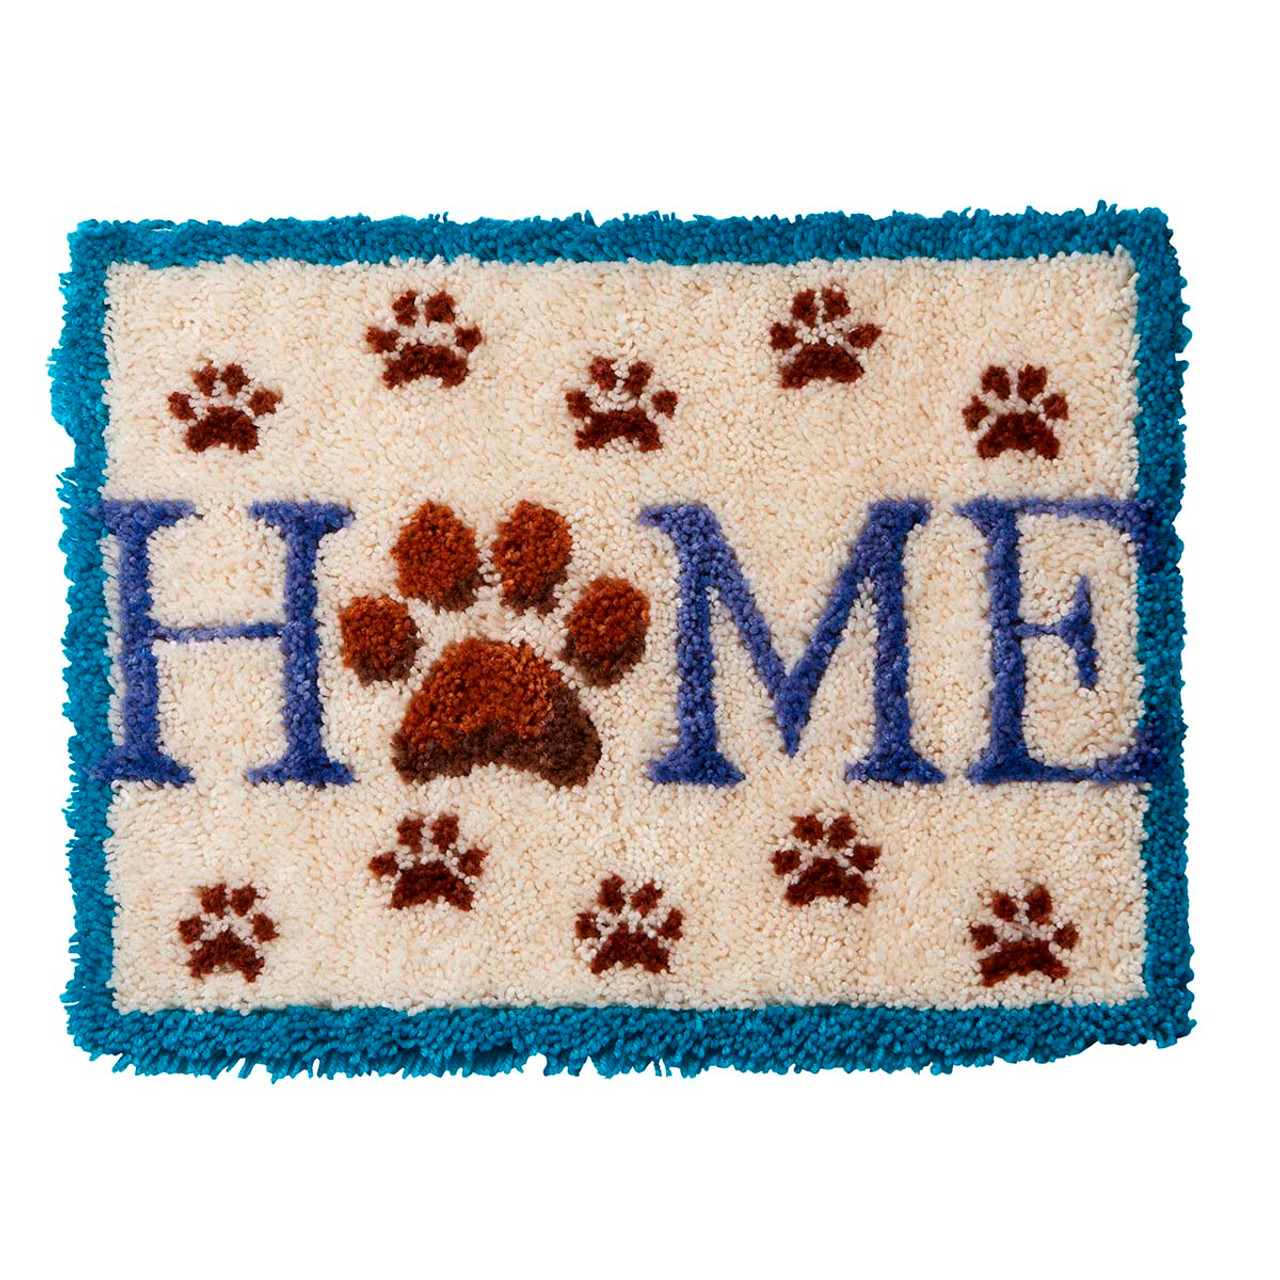 Latch Hook Rugs Kits for Adults Sea Carpet embroidery with Pattern